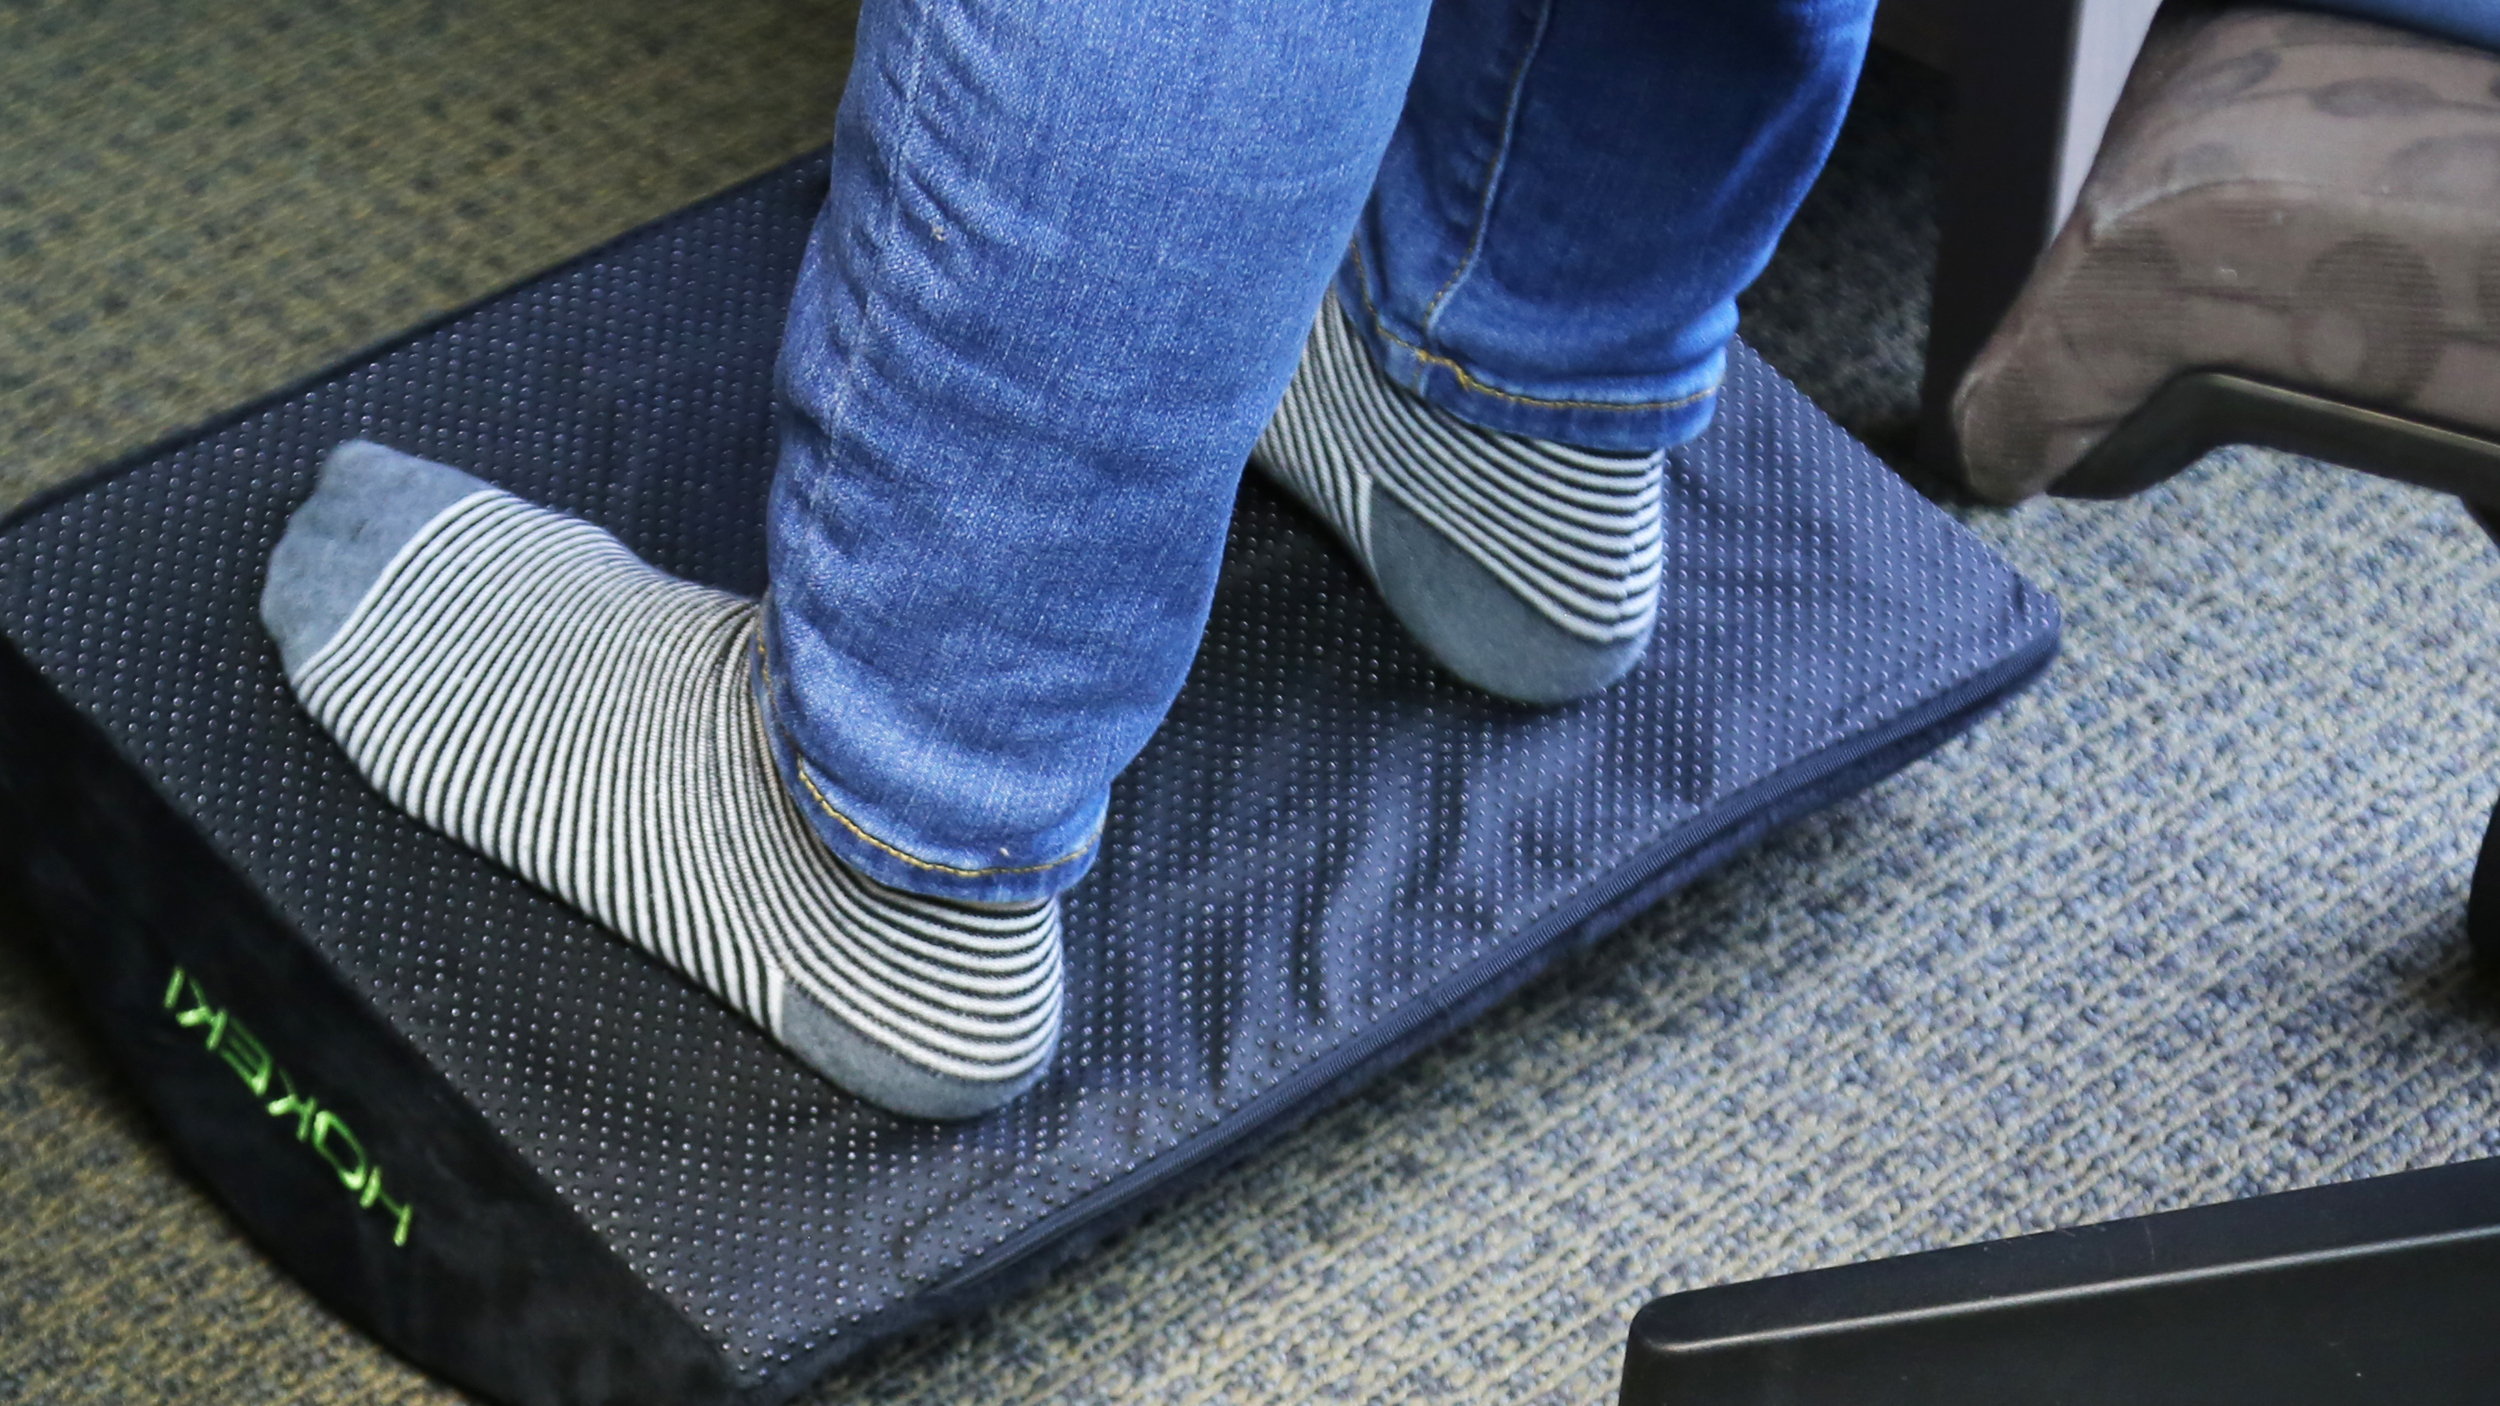 HUANUO Footrest Under Desk - Adjustable Foot Rest with Massage Texture and  Ro